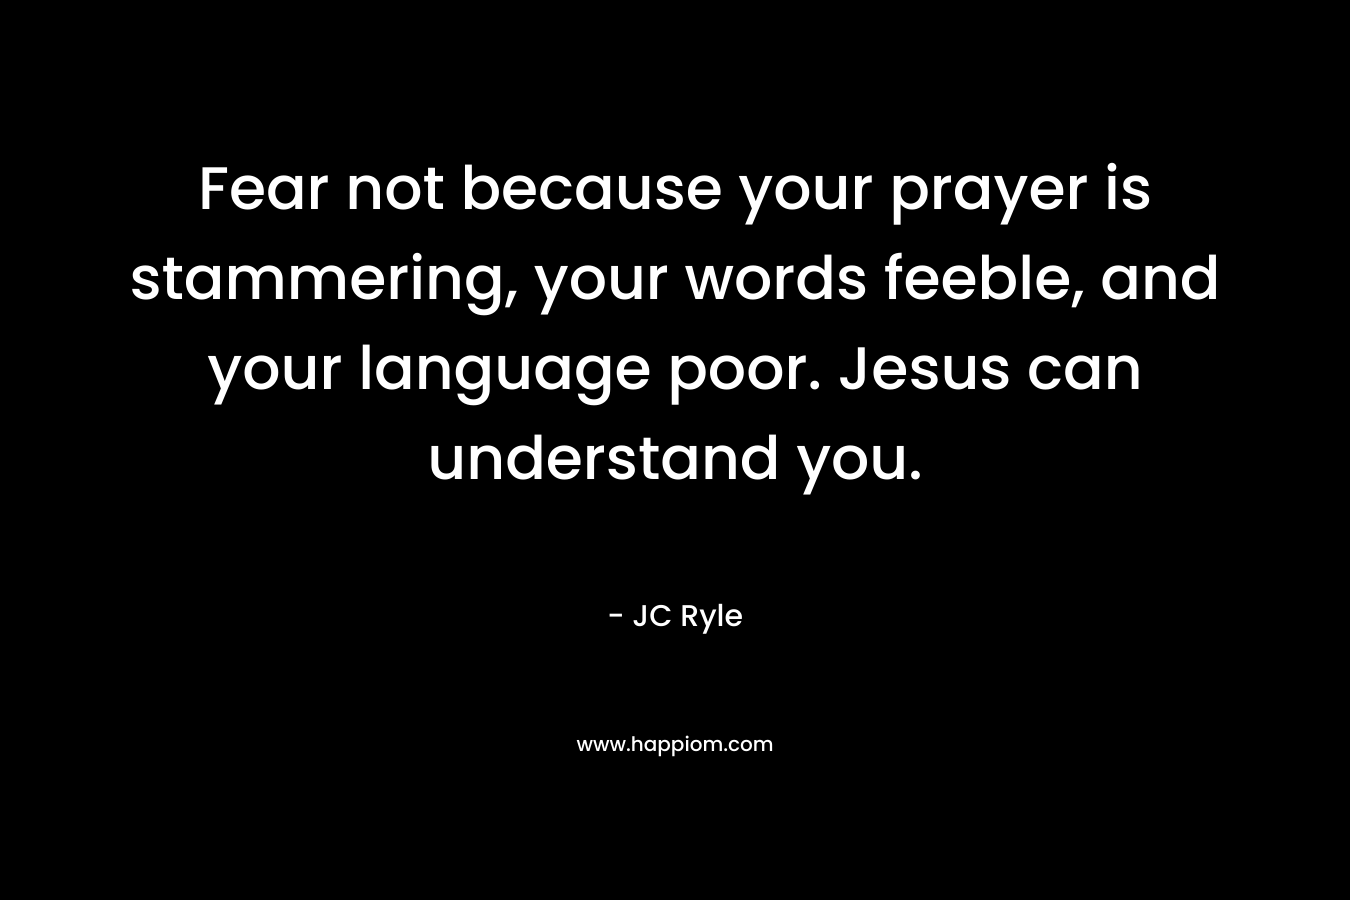 Fear not because your prayer is stammering, your words feeble, and your language poor. Jesus can understand you. – JC Ryle